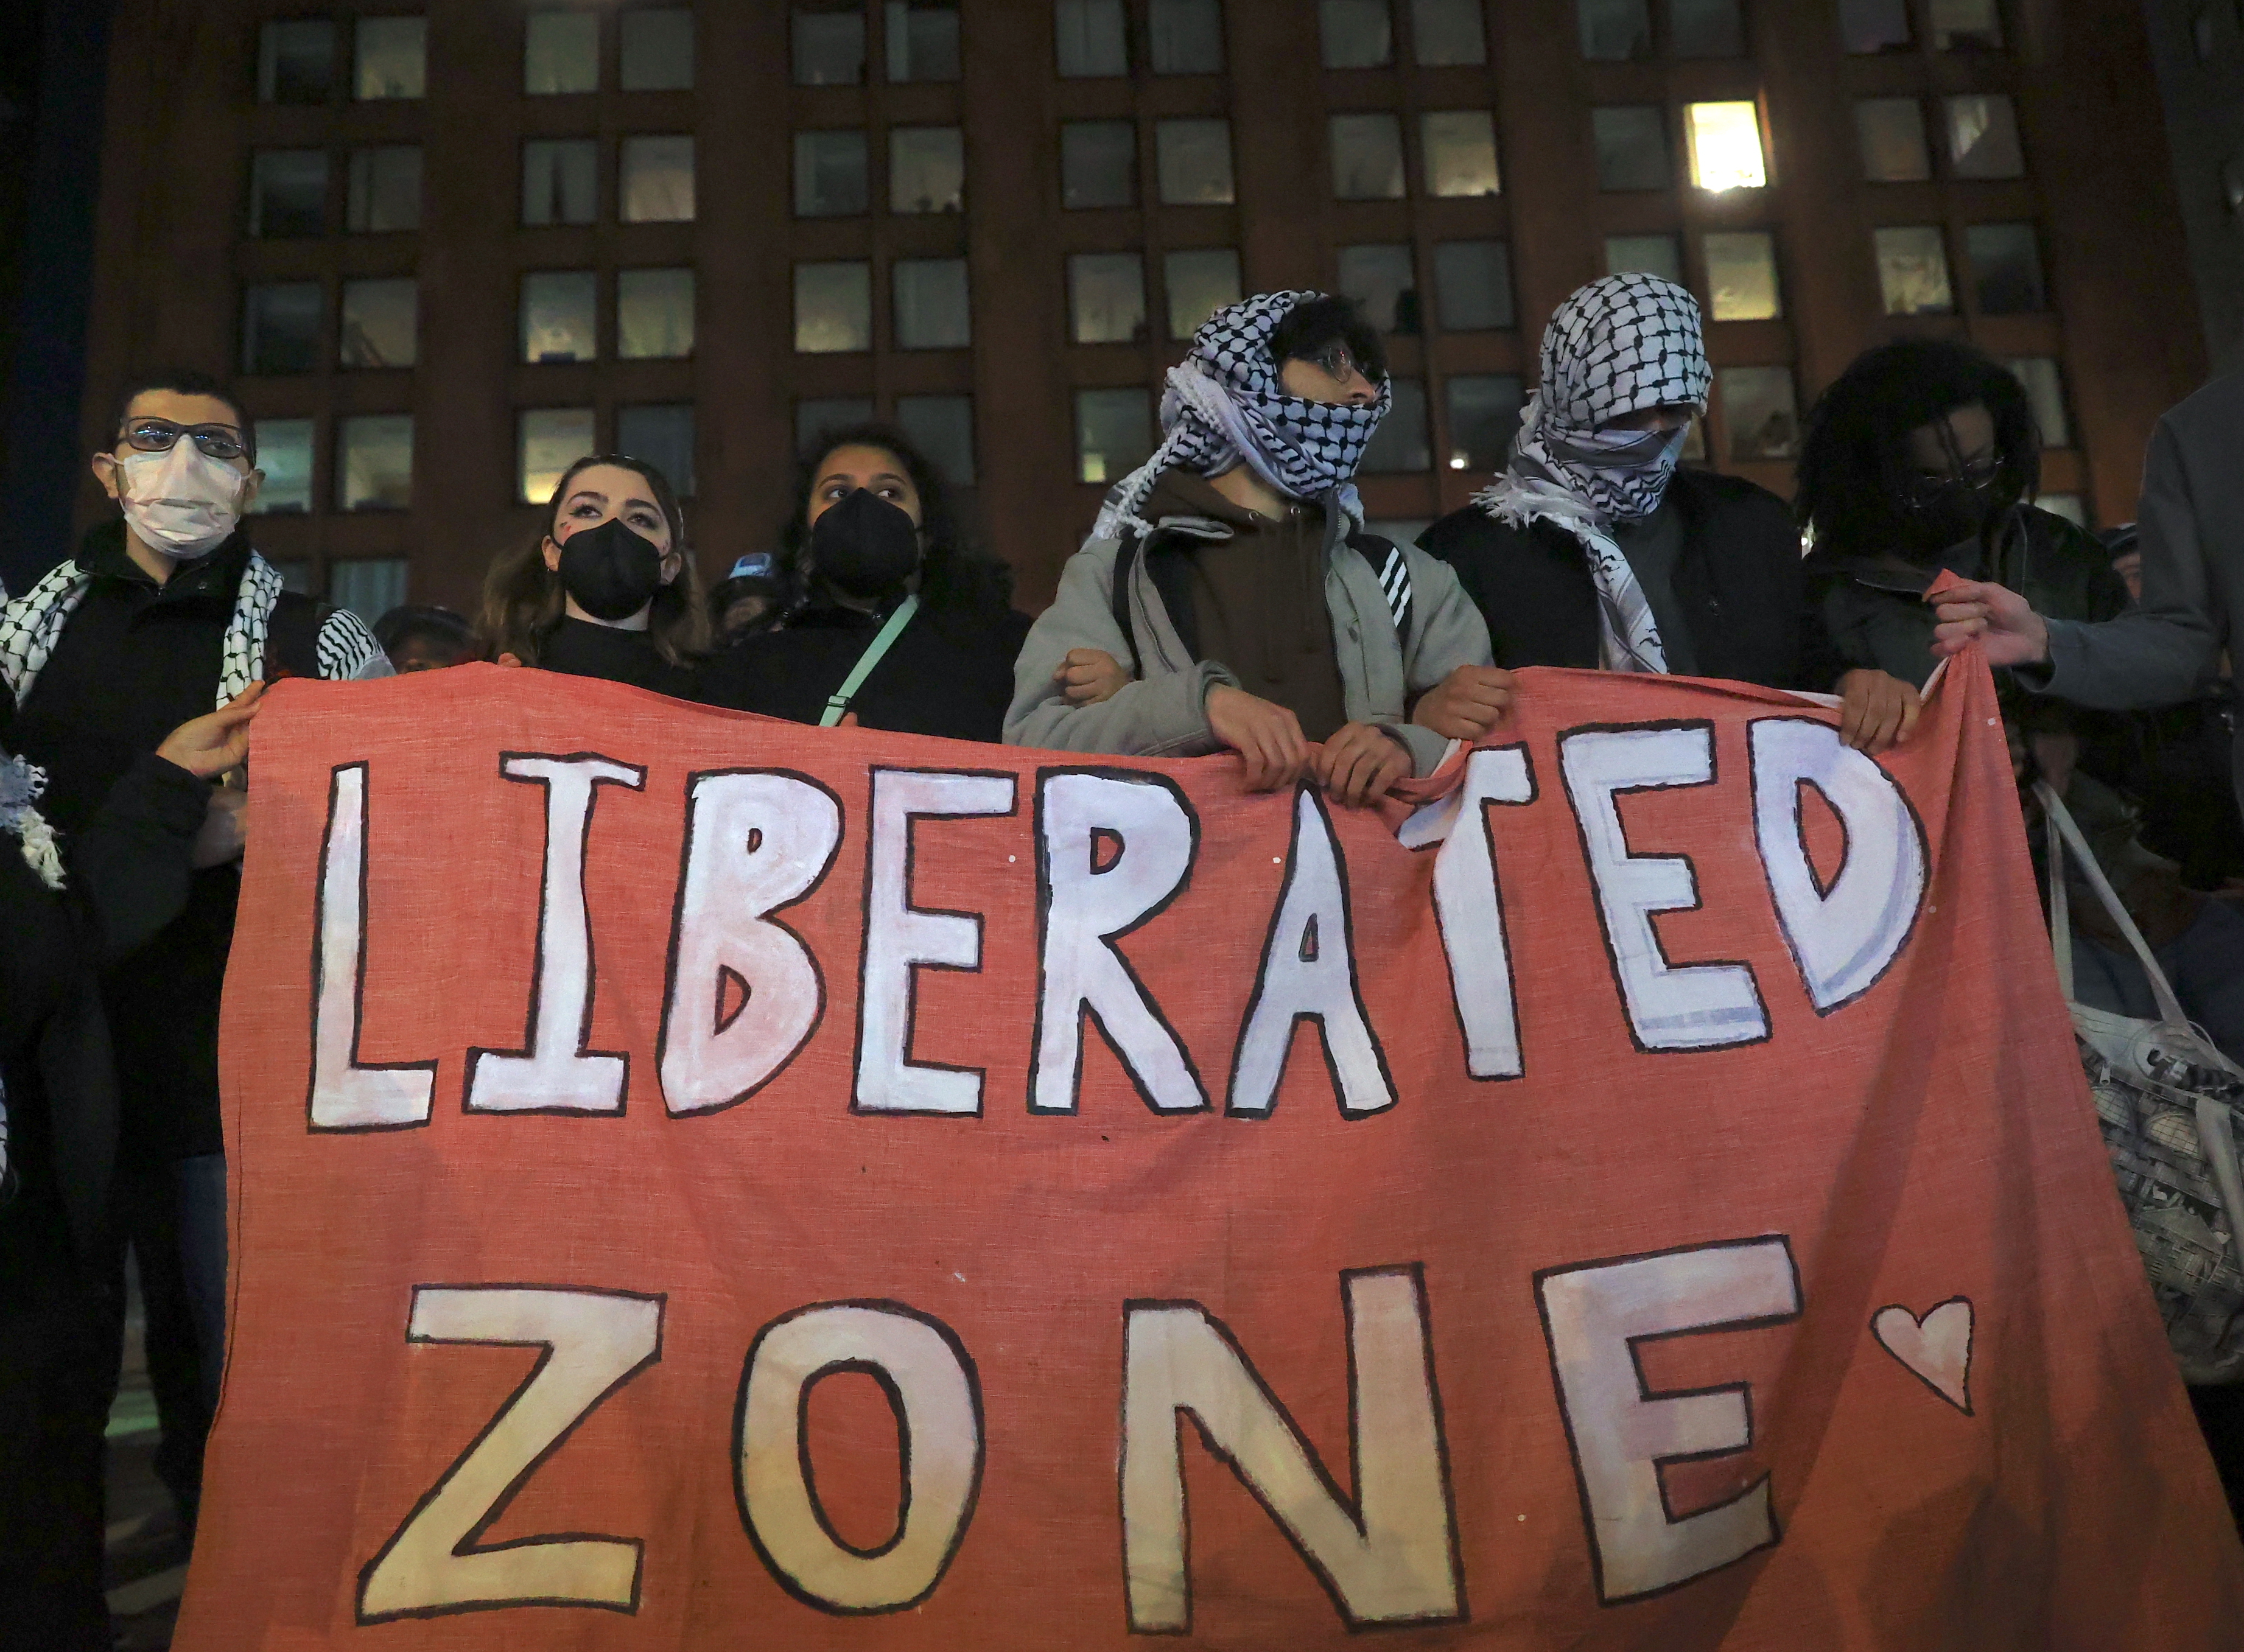 Pro-Palestinian protesters holding a sign that says “Liberated Zone” in New York.